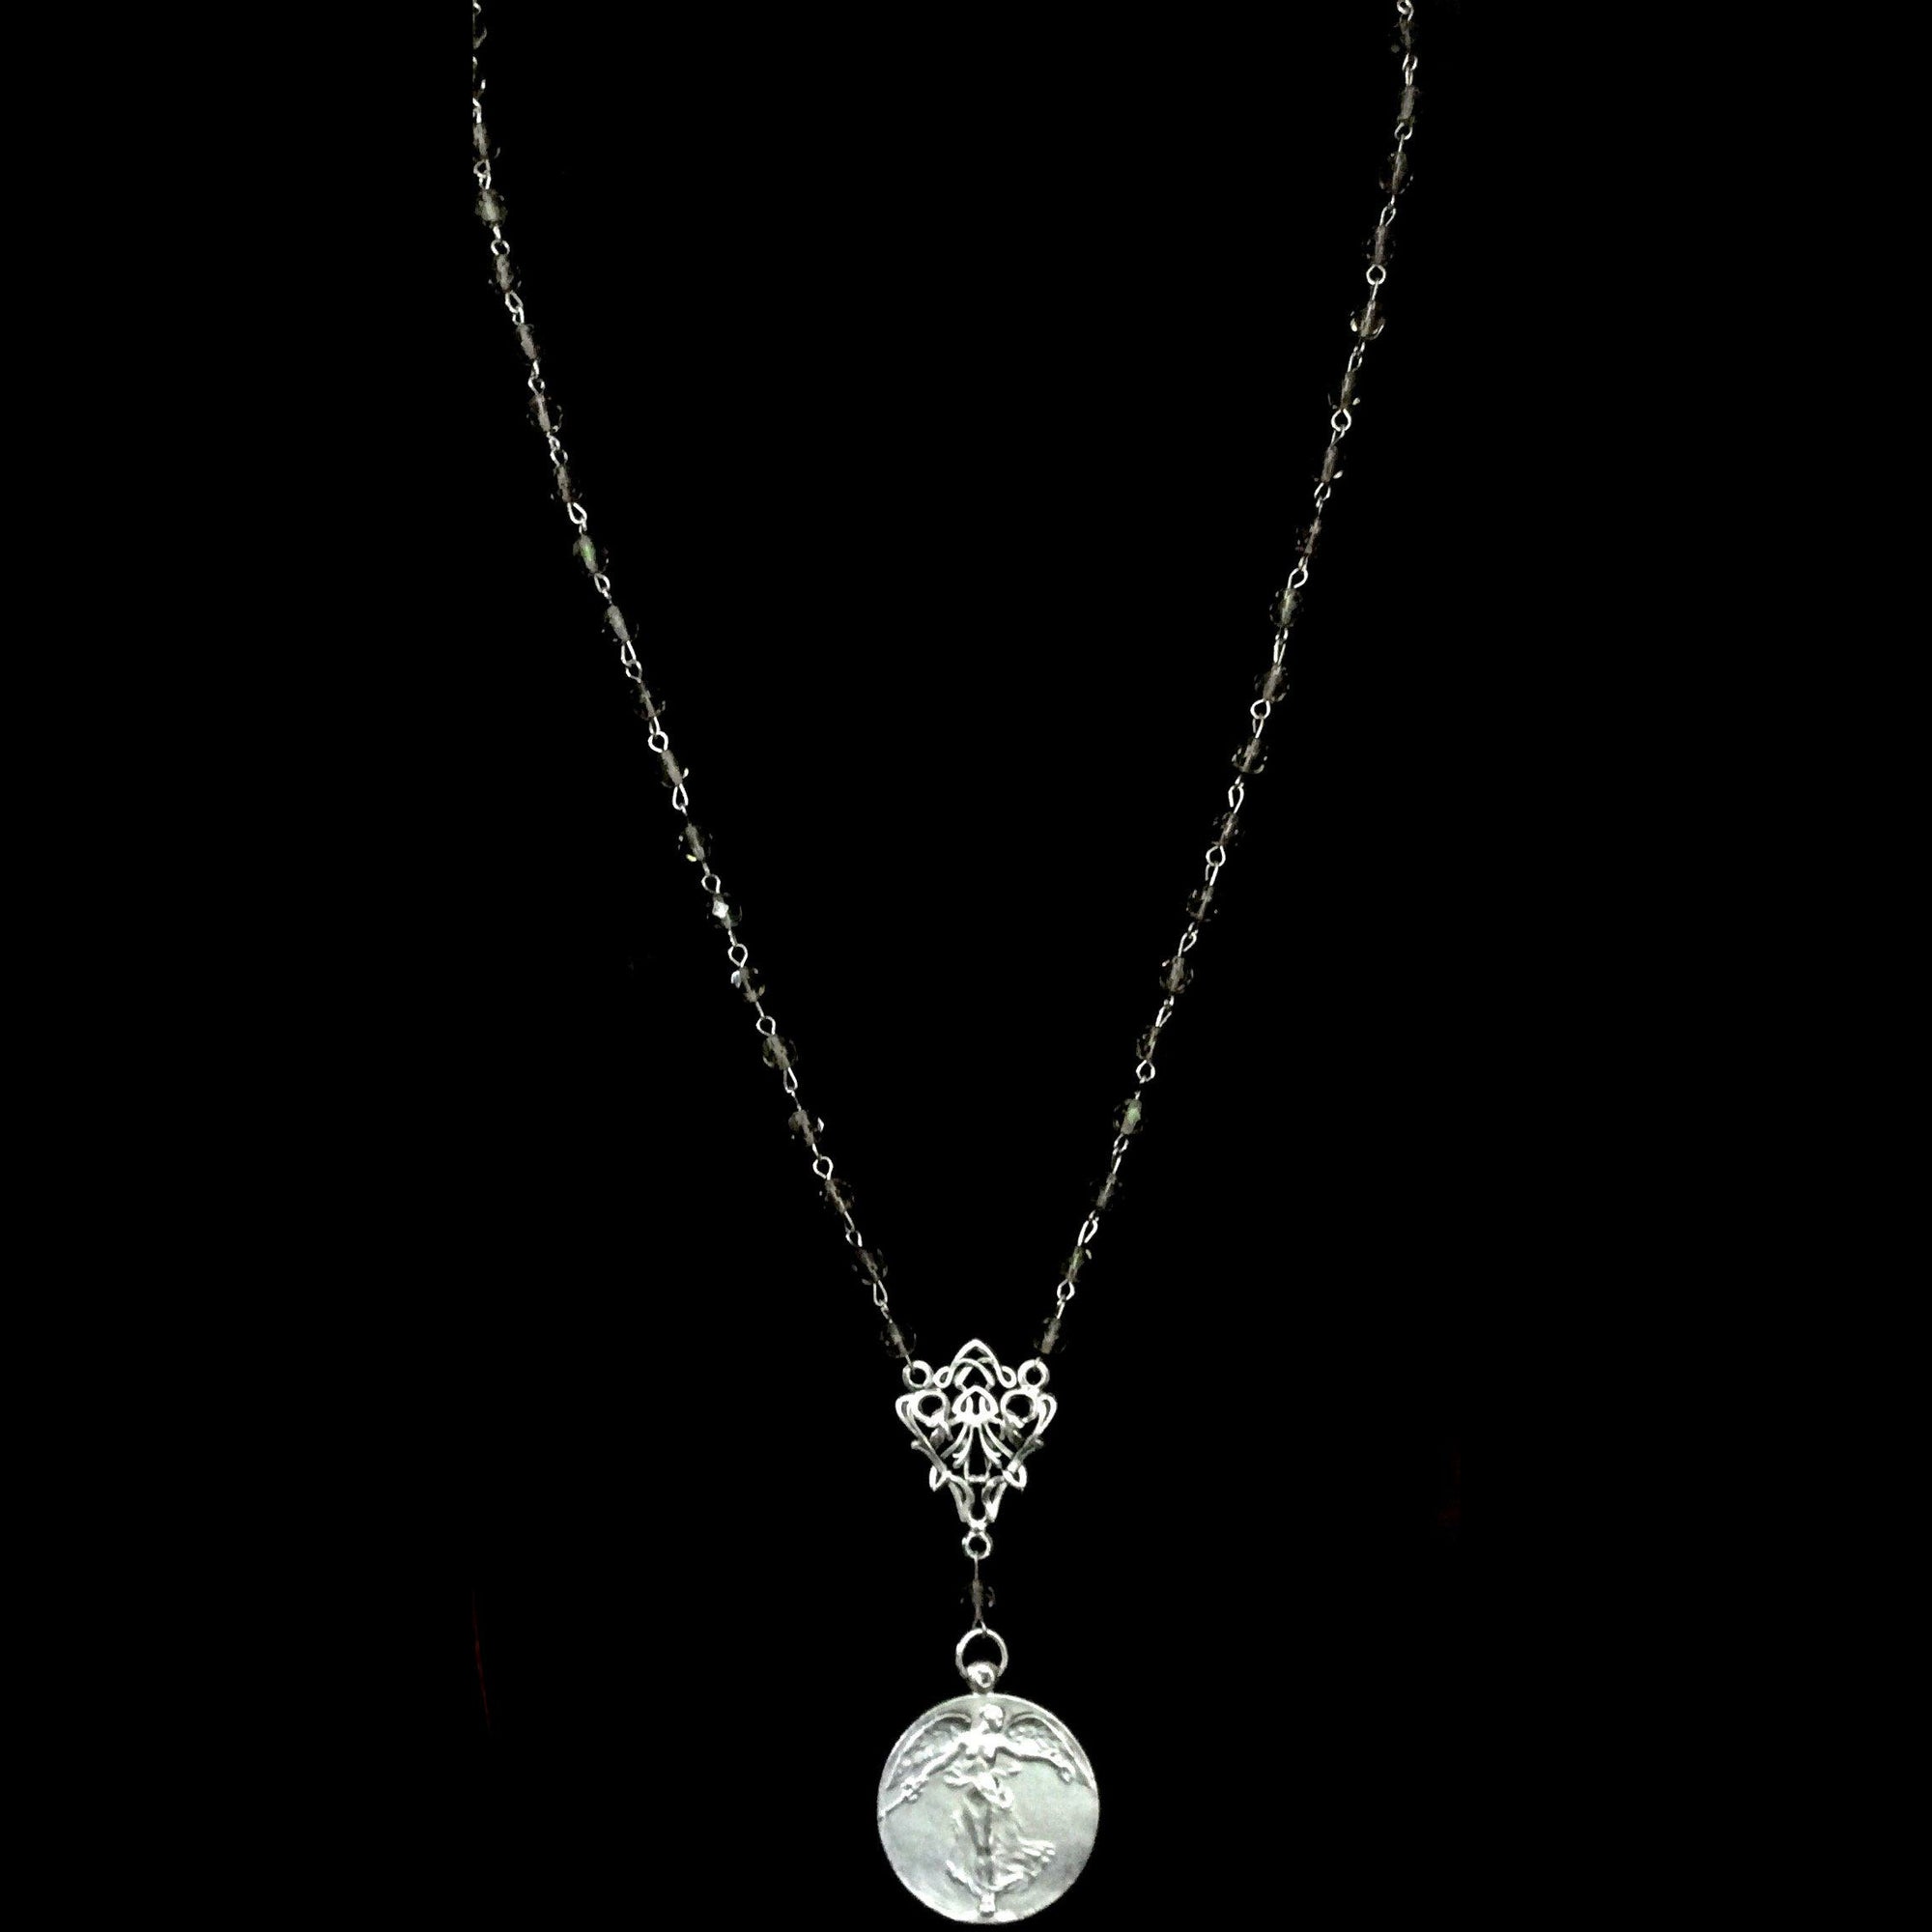 Peace Angel Medallion Black Diamond & Silver Necklace by Whispering Goddess